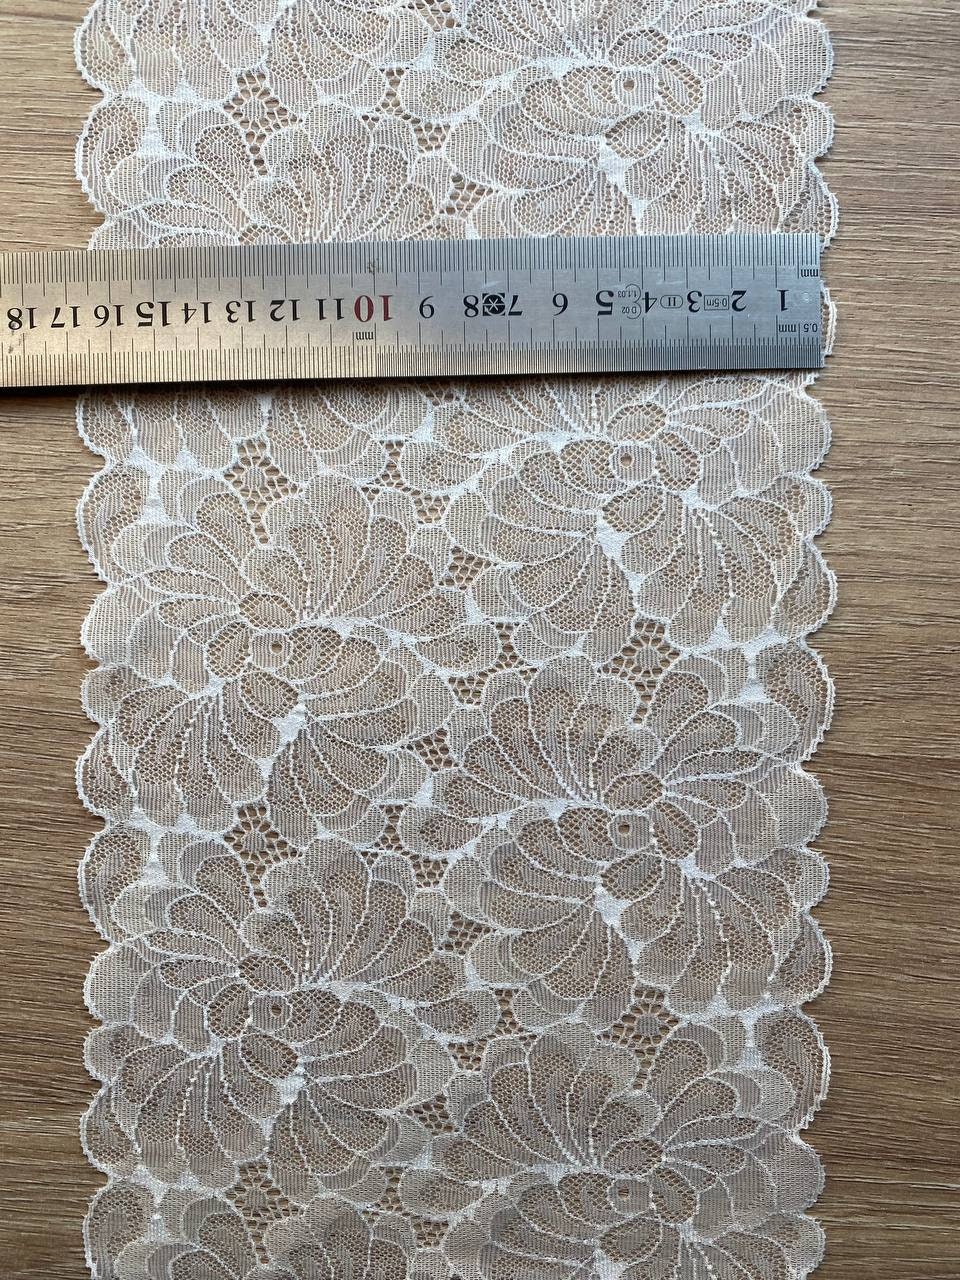 Ivory Brown Corded Stretch Lace, Lingerie Lace Trim, Bra Making Width 16  Cm/ 6.3, Nr Q4015 